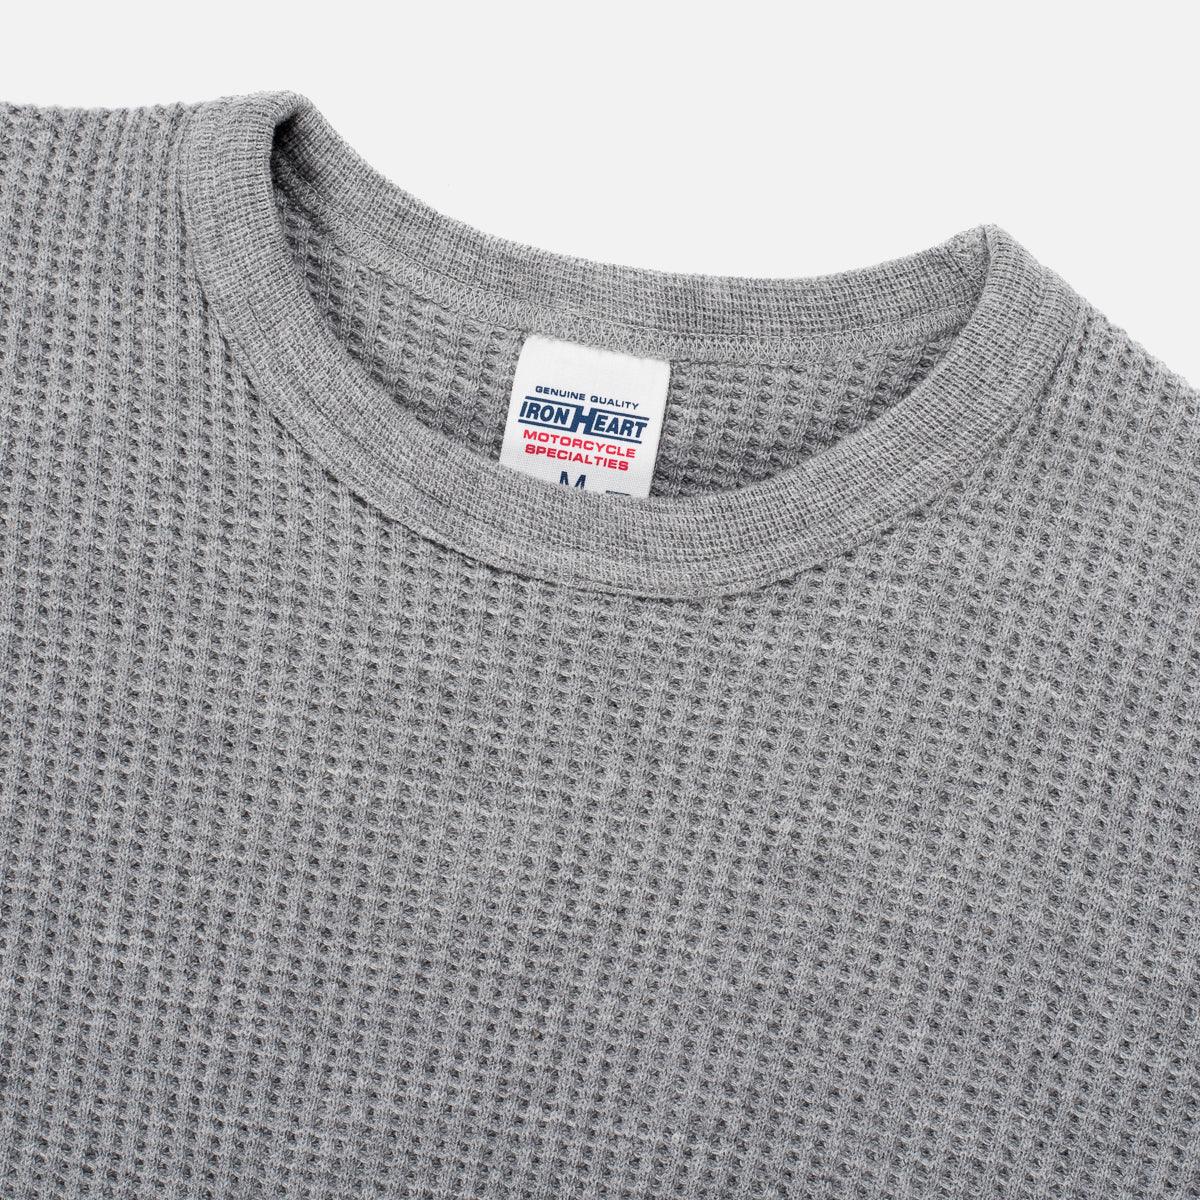 IHTL-1301-GRY - Waffle Knit Long Sleeved Crew Neck Thermal Top - Grey